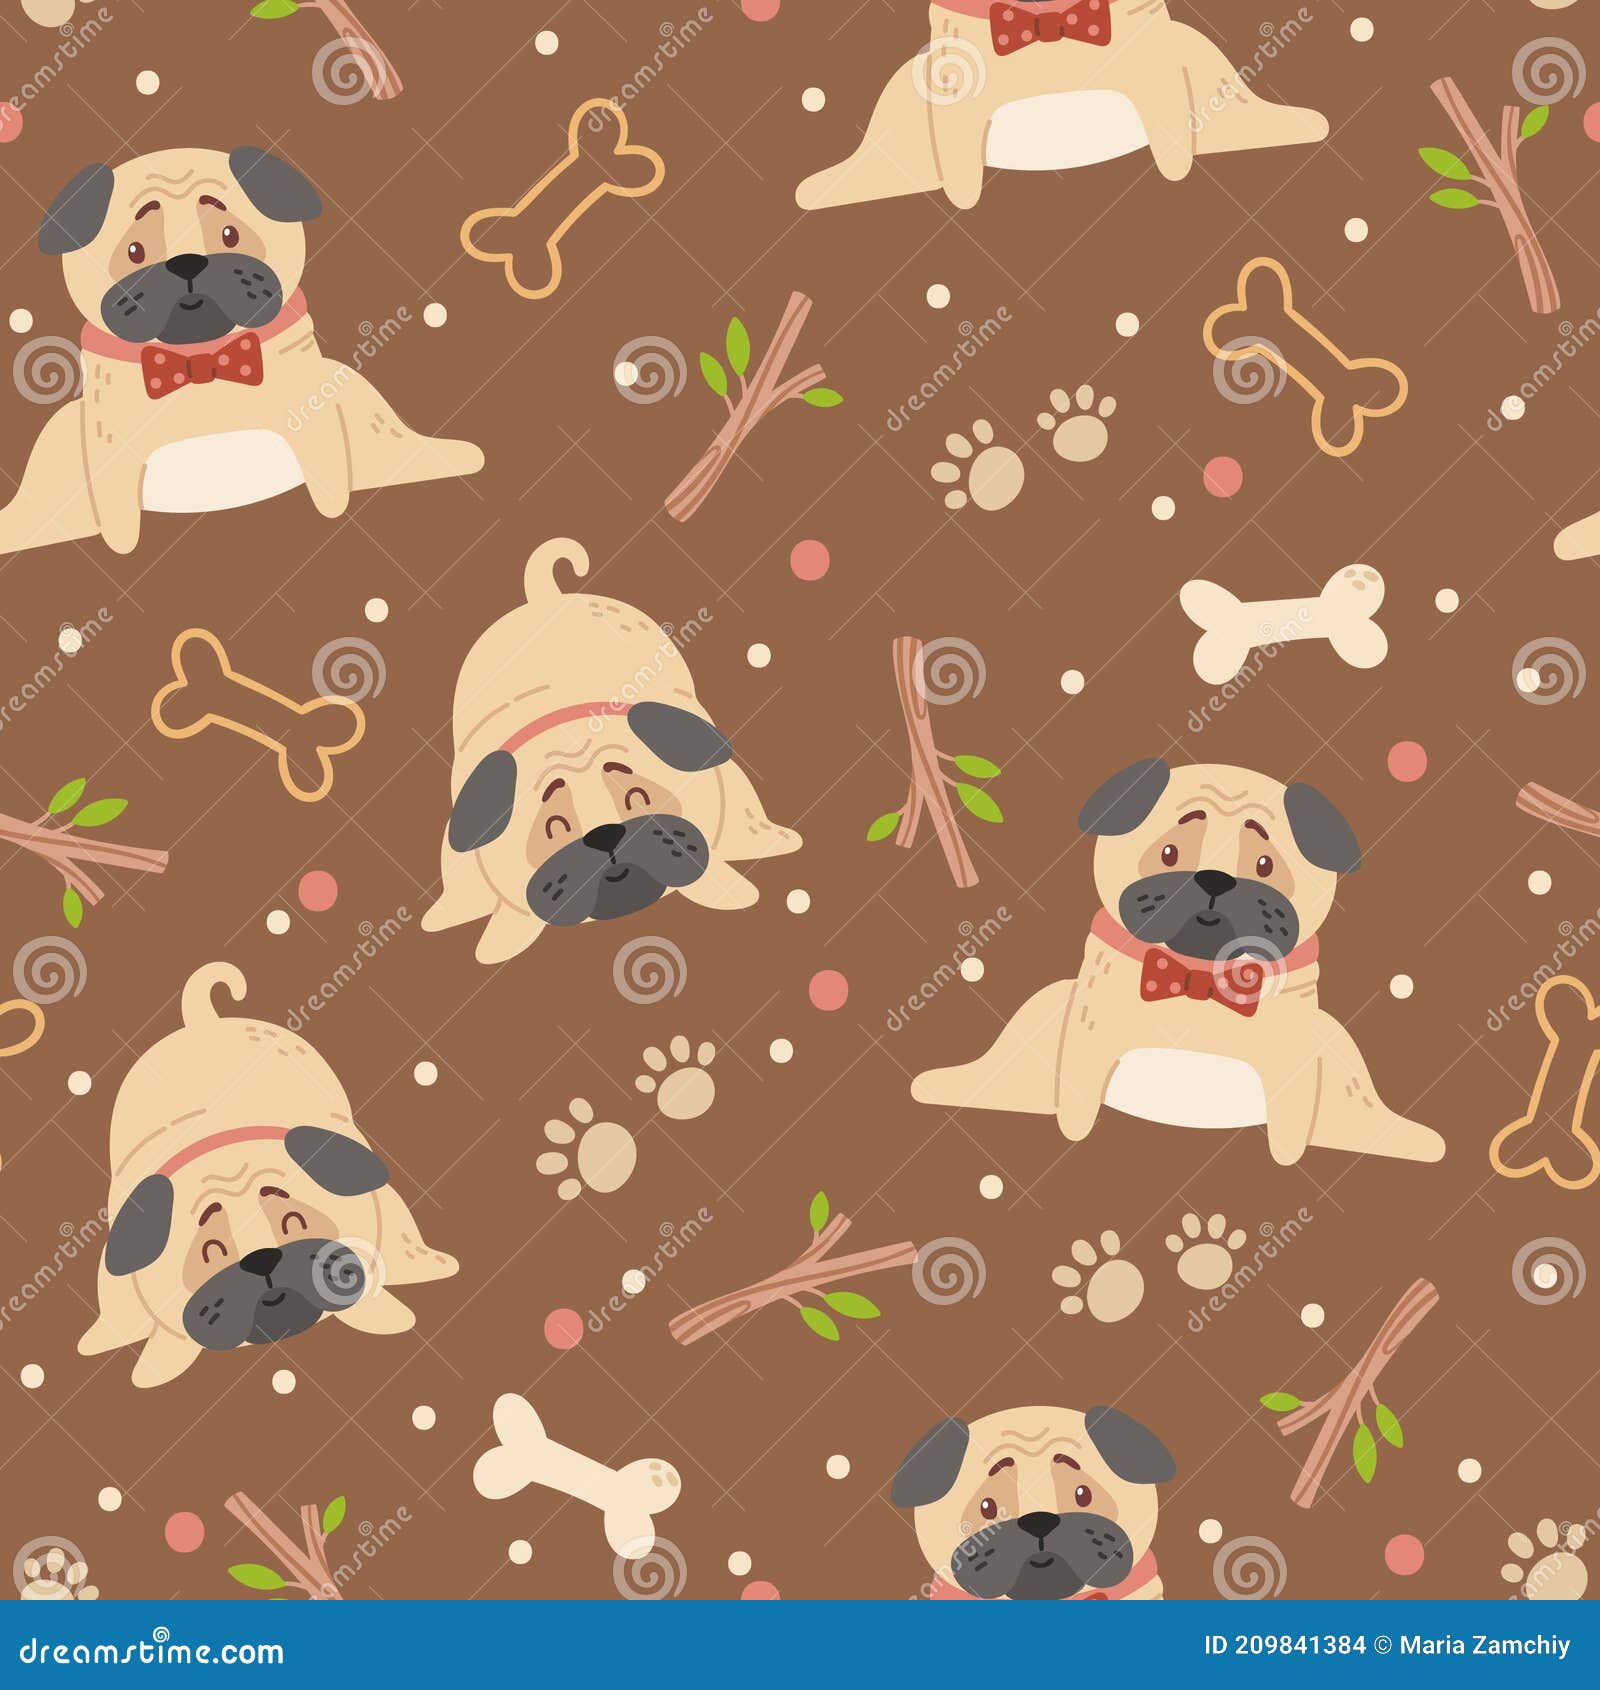 Cute Dog Pug Kids Seamless Pattern Stock Vector - Illustration of background,  accessories: 209841384